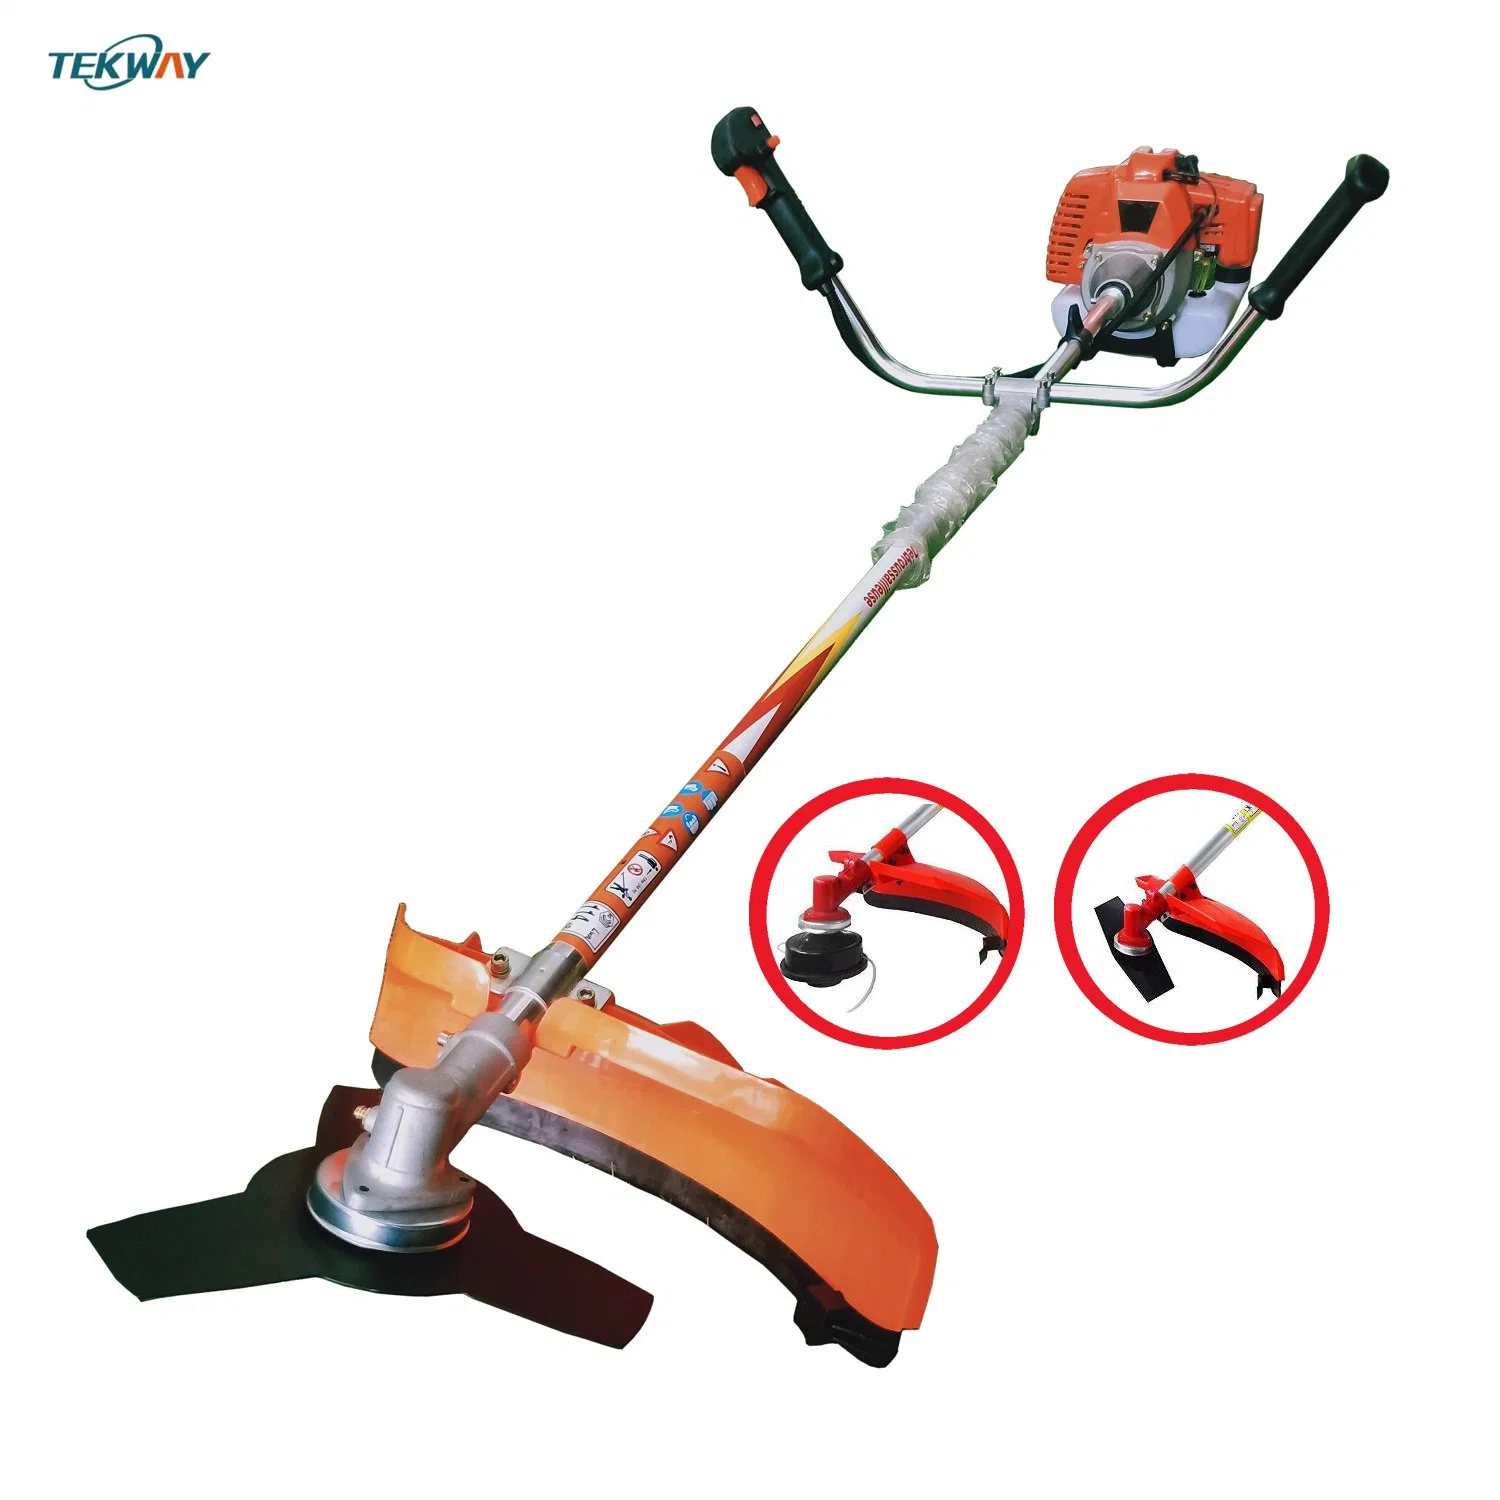 Four Color Brush Cutter Machine with EPA Certificate Support